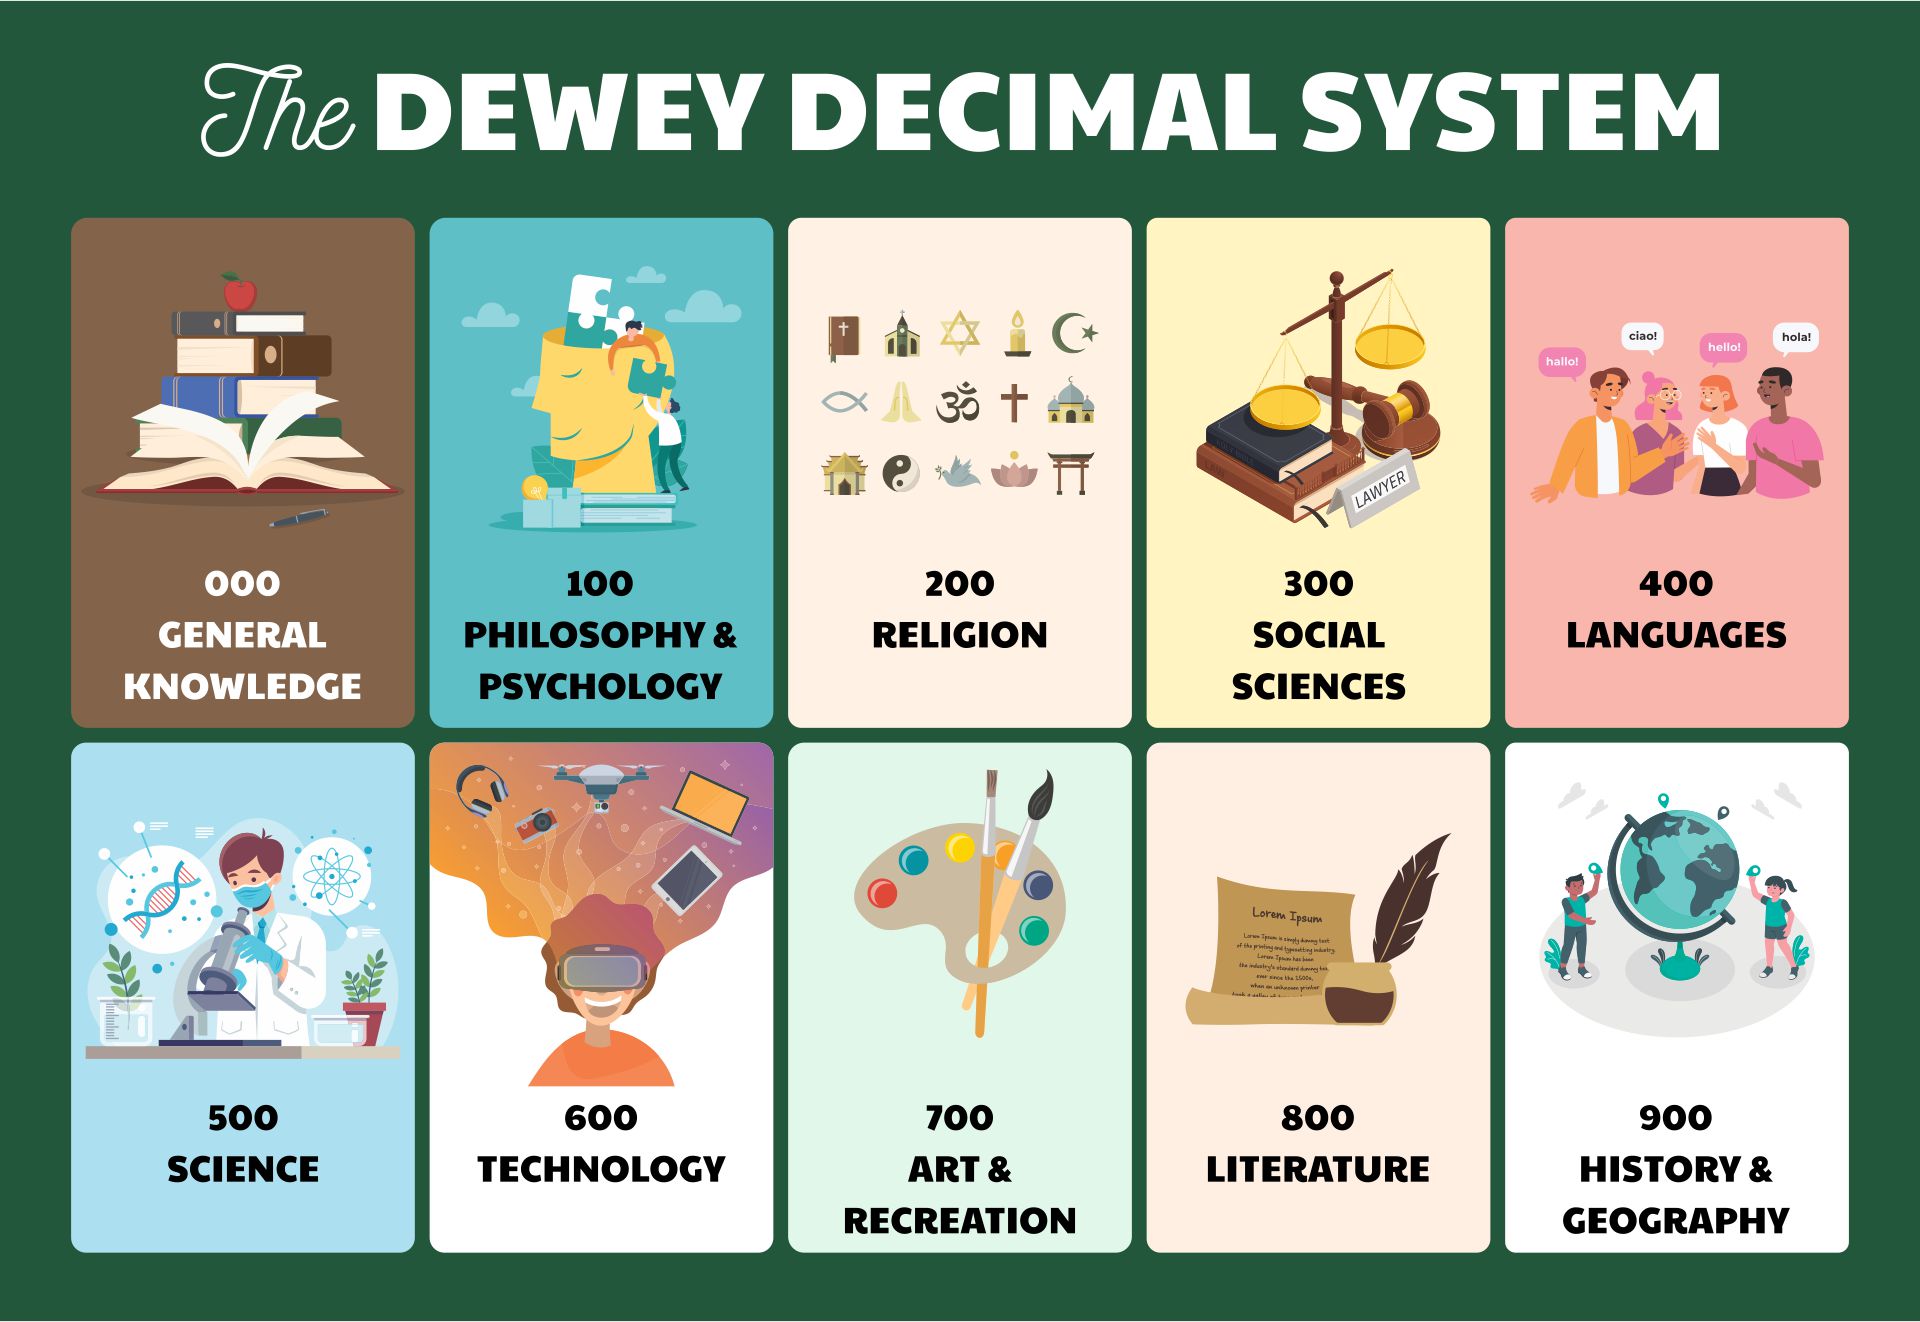 8-best-images-of-printable-dewey-decimal-system-posters-for-free-dewey-decimal-classification